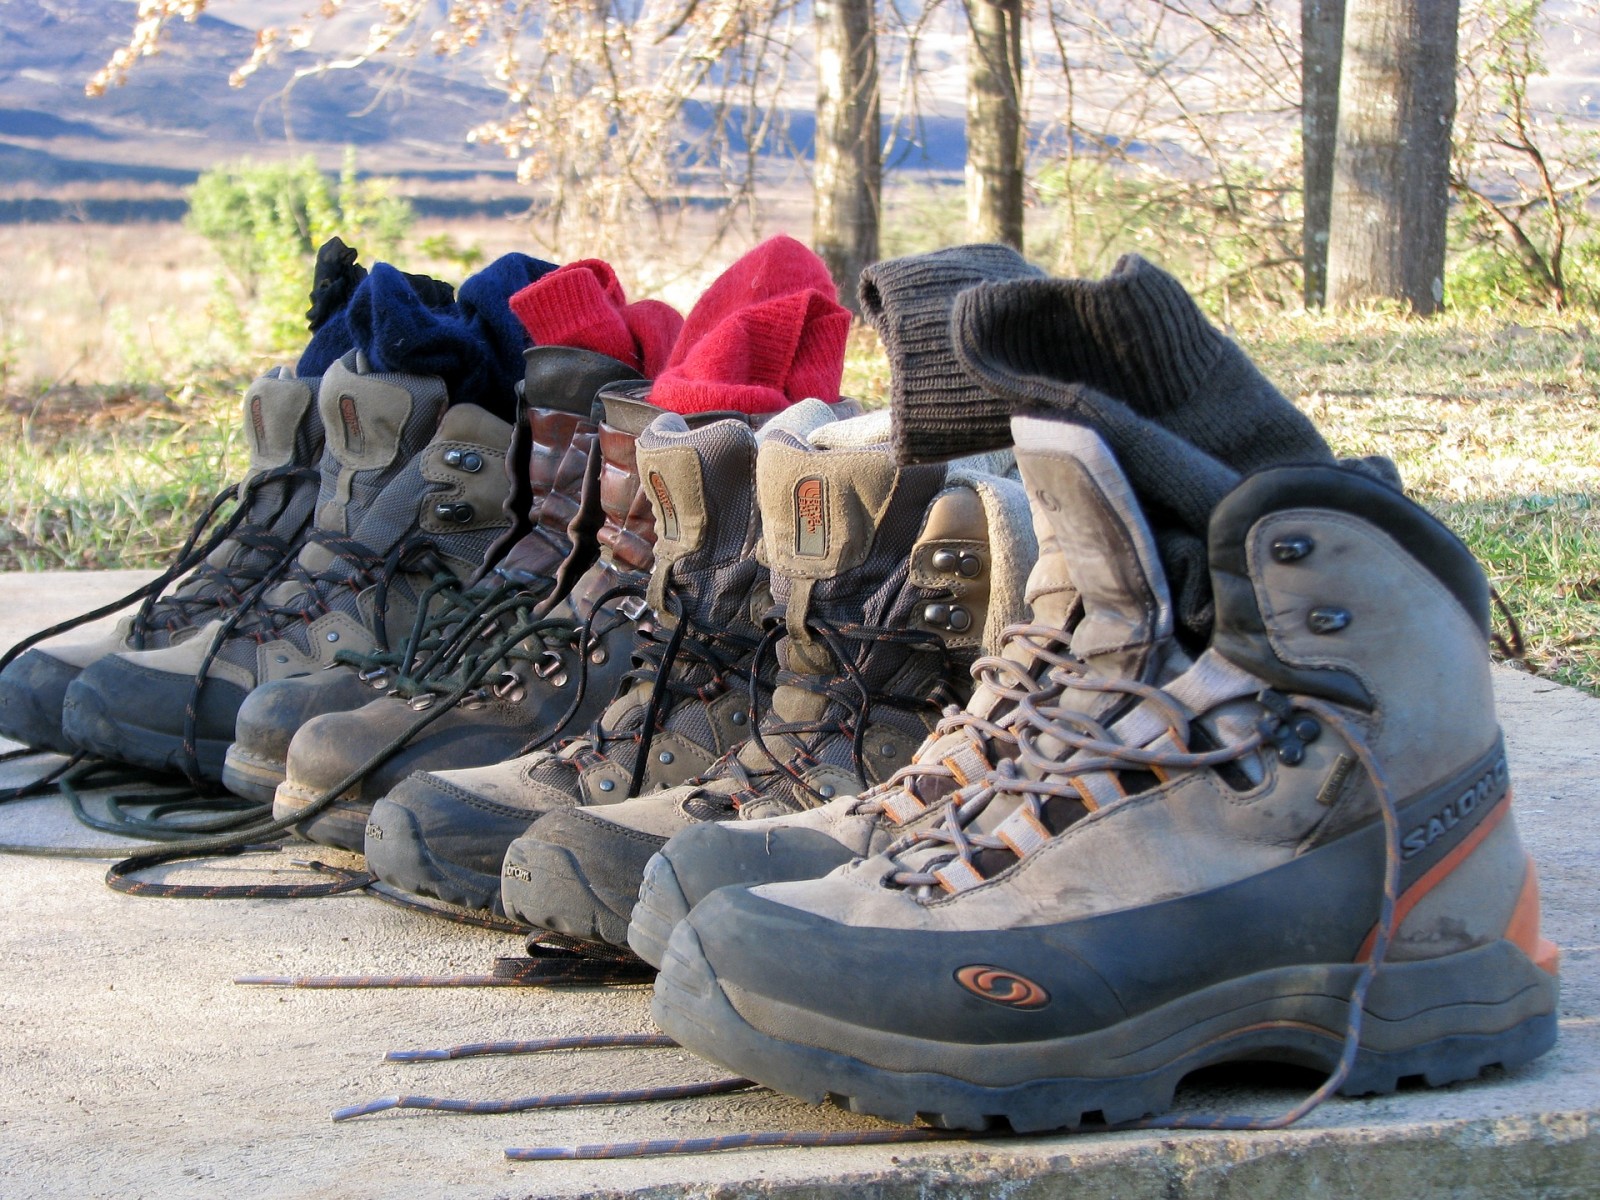 Hiking Boots and Shoes